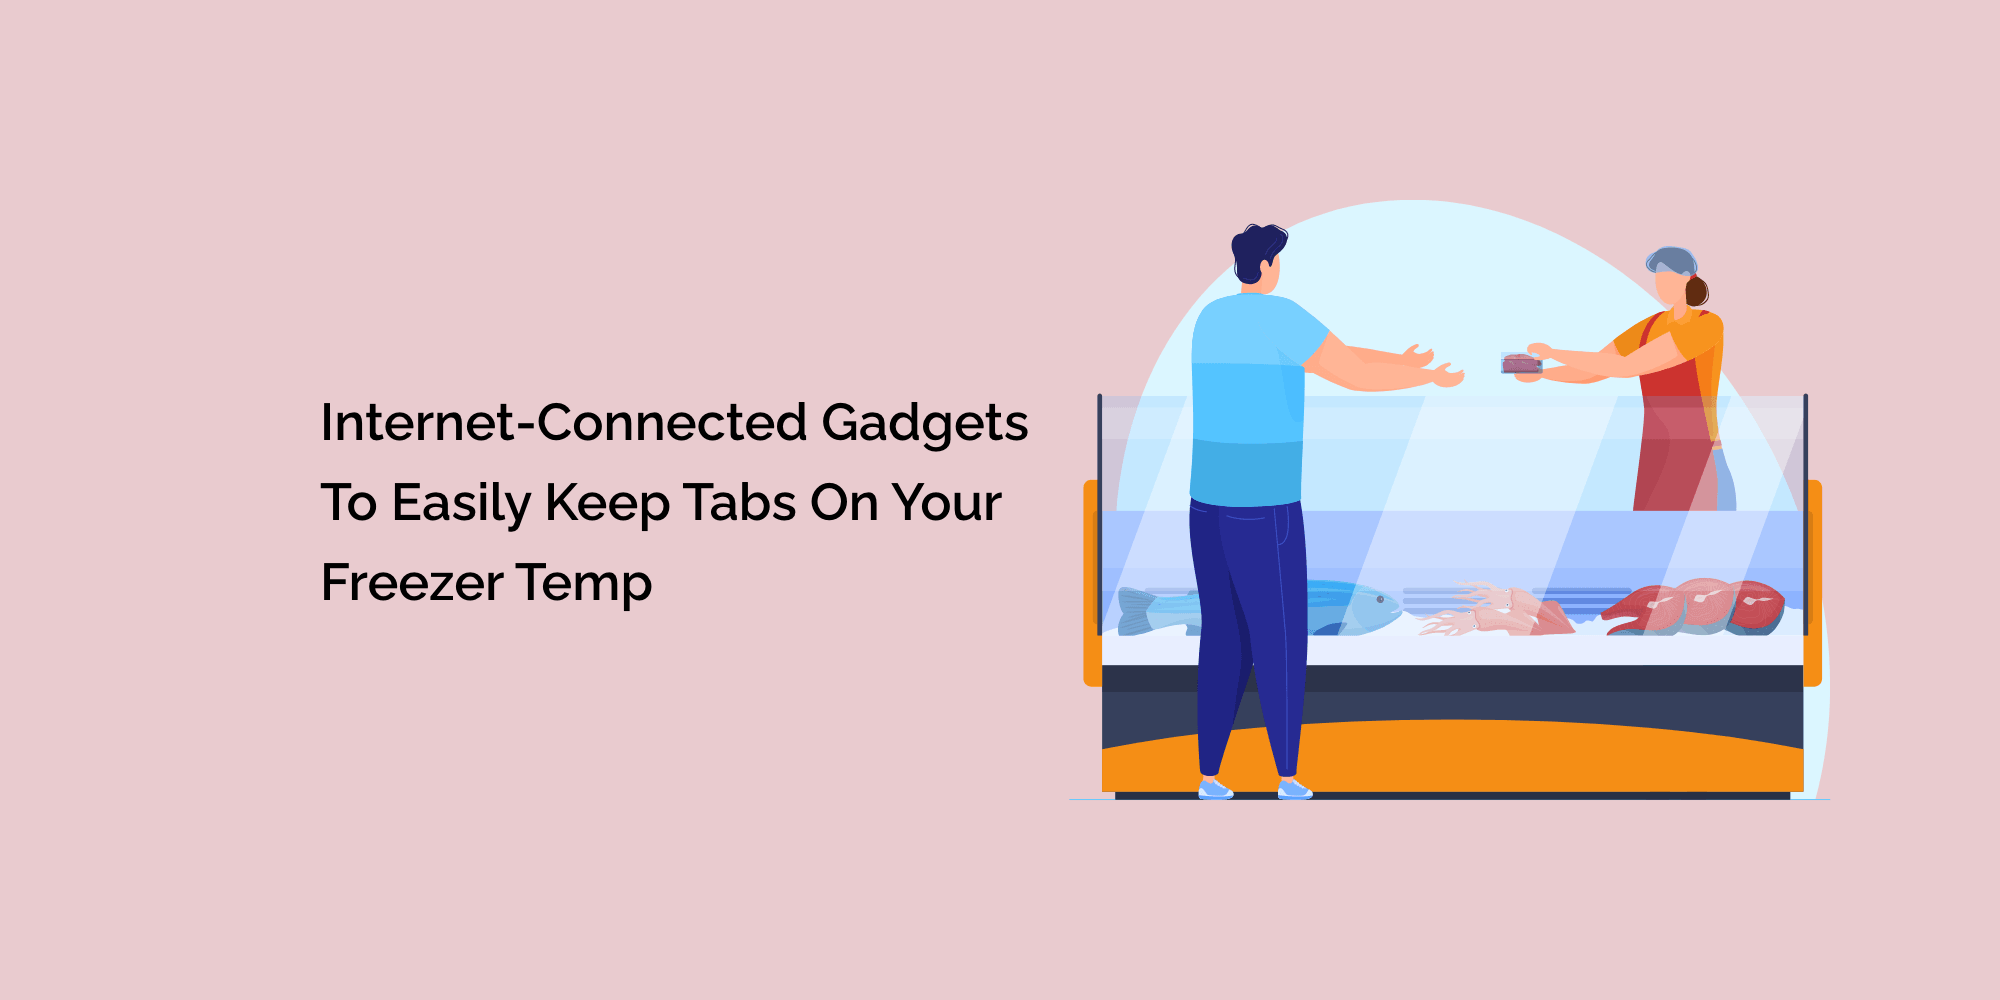 Internet-Connected Gadgets To Easily Keep Tabs On Your Freezer Temp